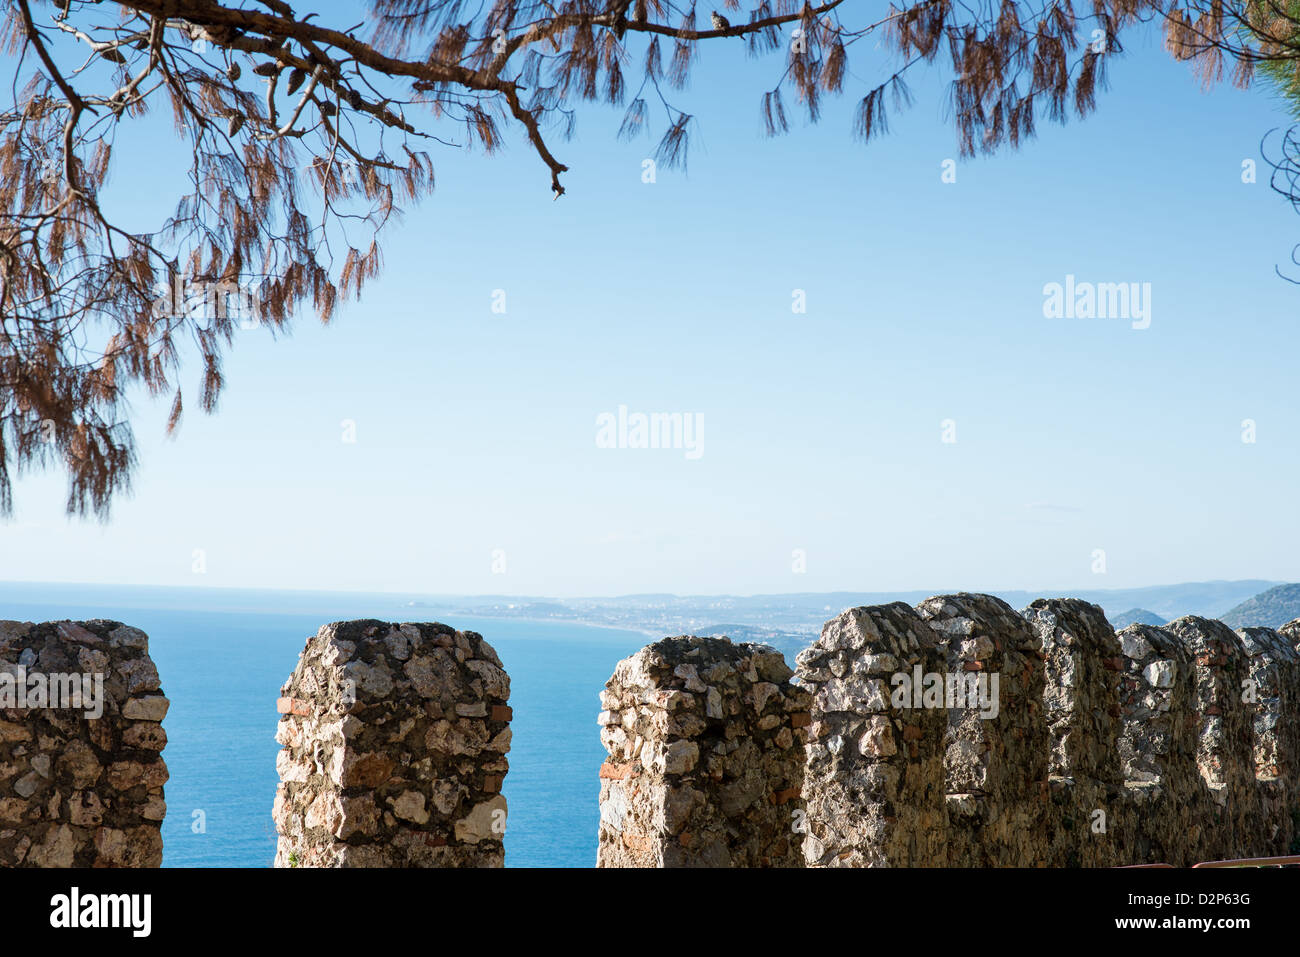 Crenelated battlement at the fortress of Alanya built by the Seljuk Turks in the thirteenth century. Stock Photo